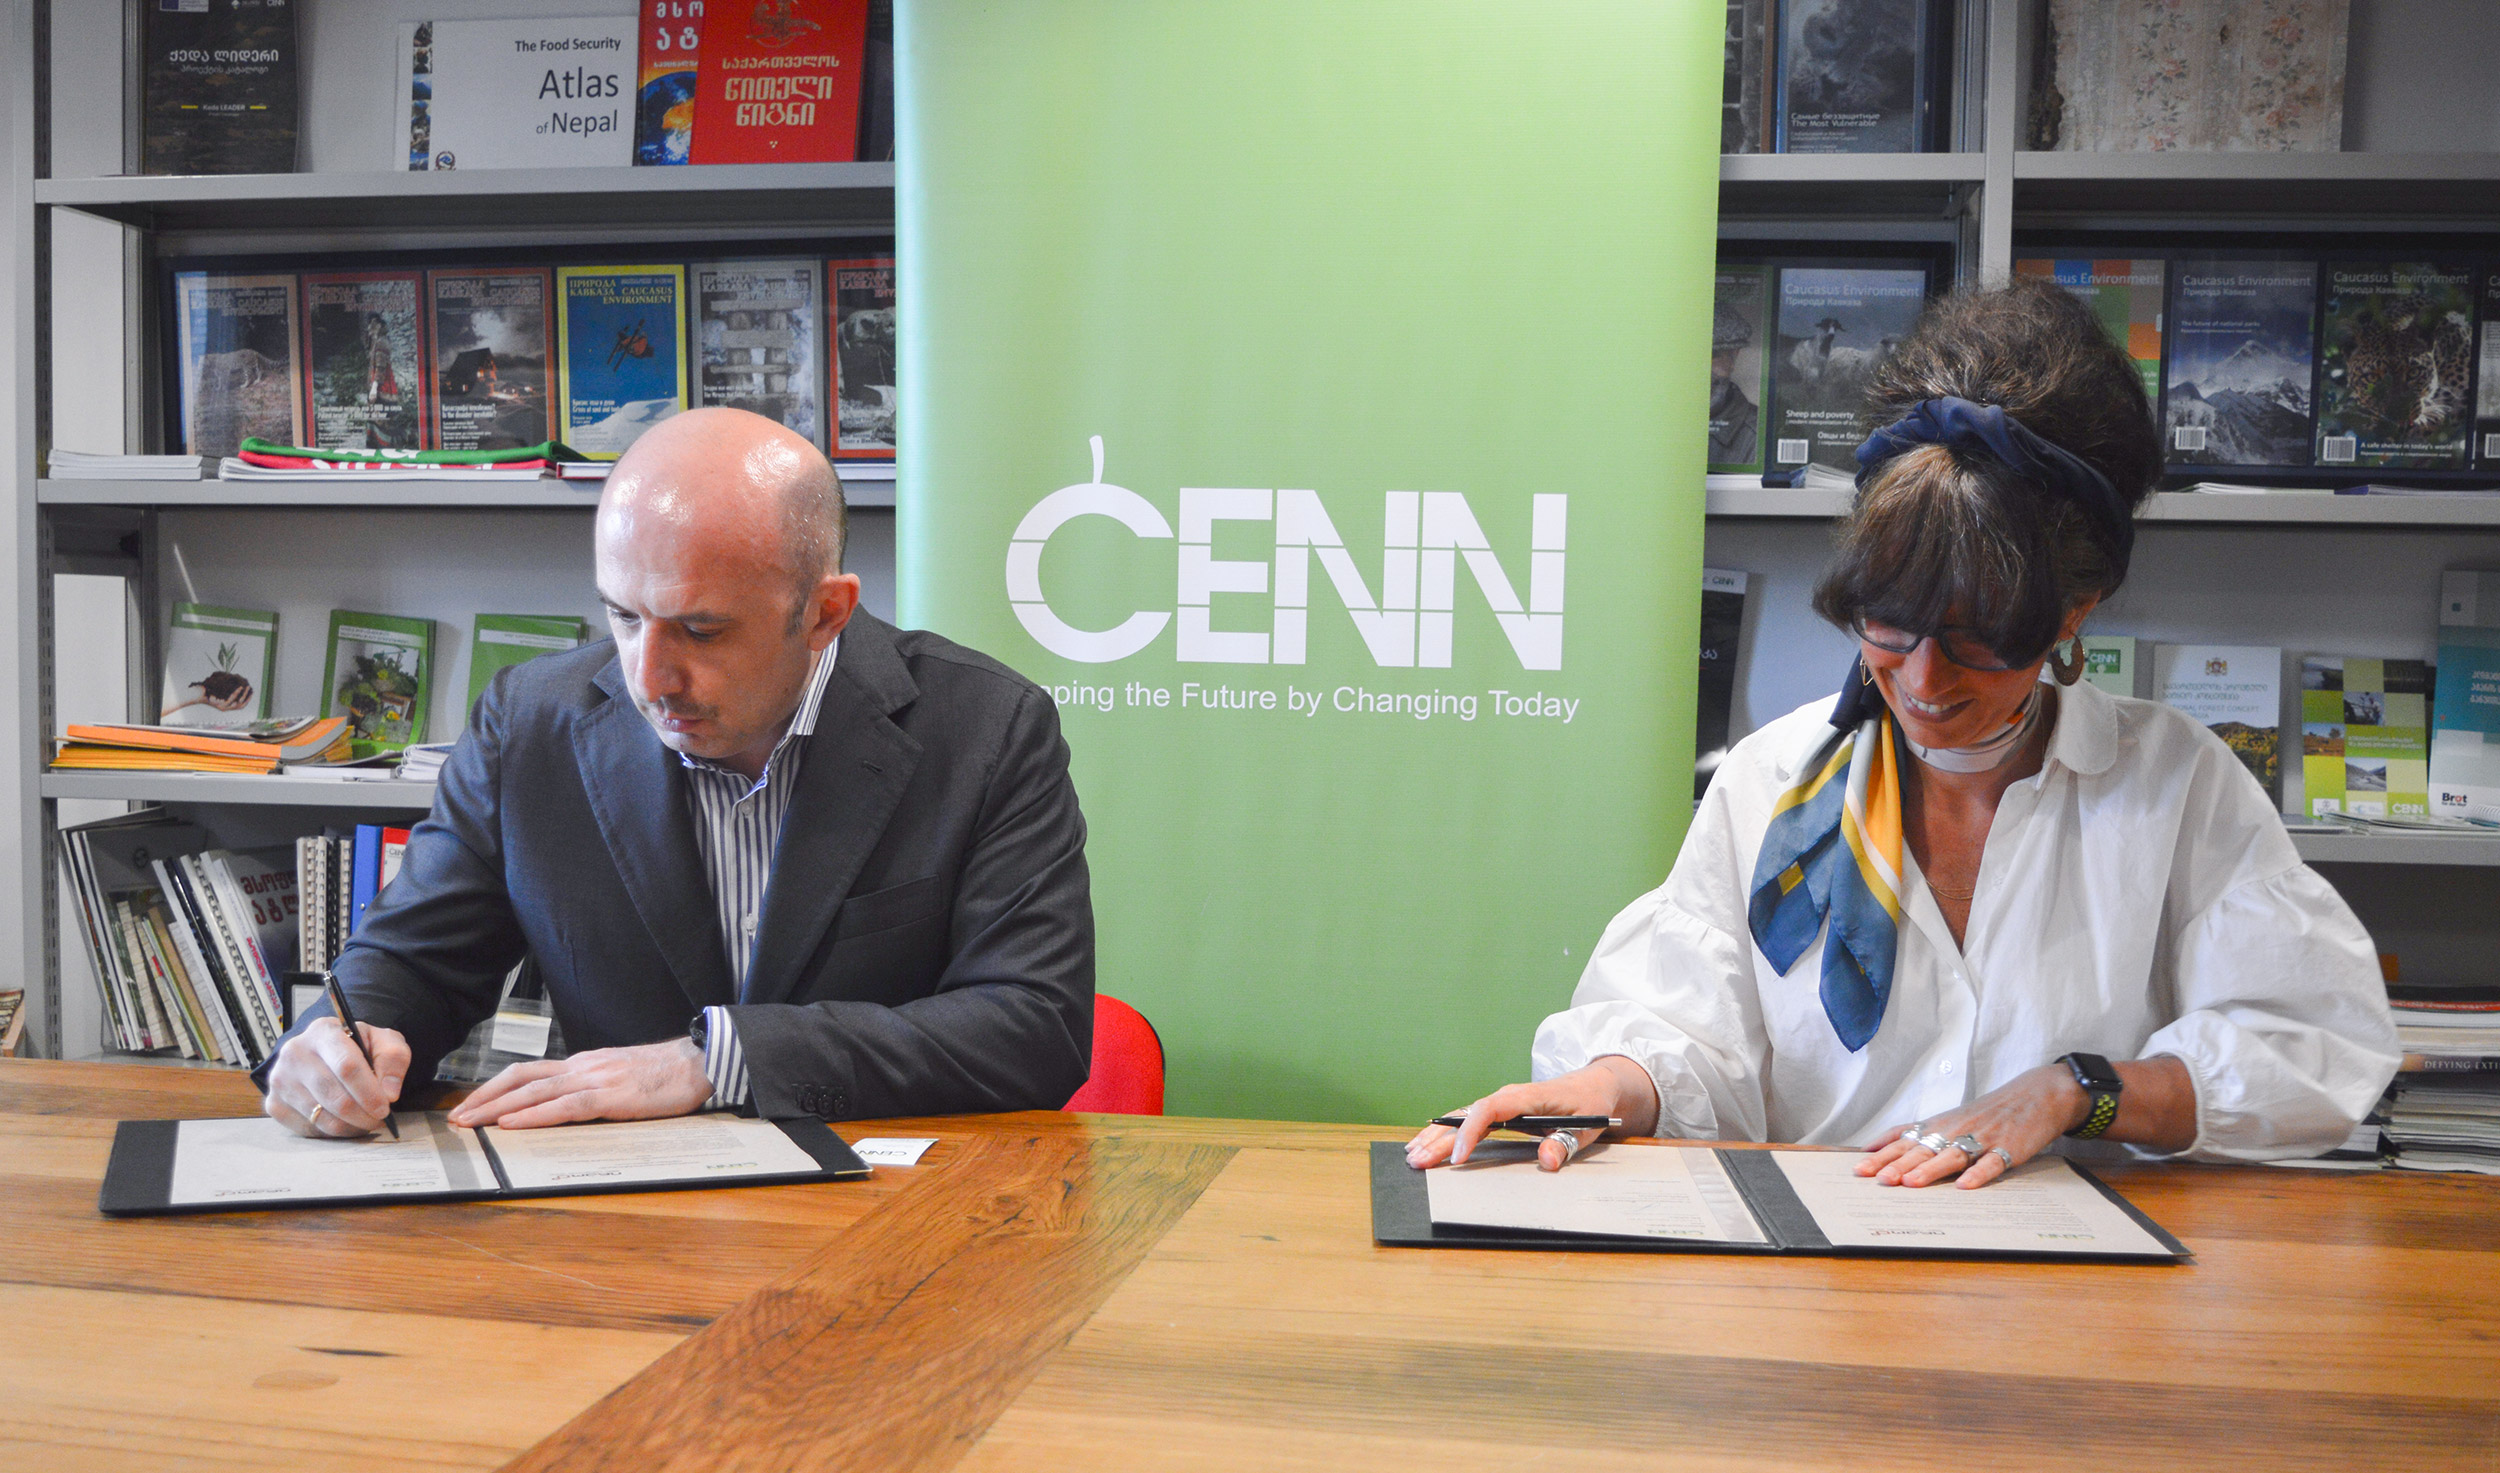 CENN and Irao Insurance Company Sign a Memorandum to Establish Environmentally Friendly Practices in Offices